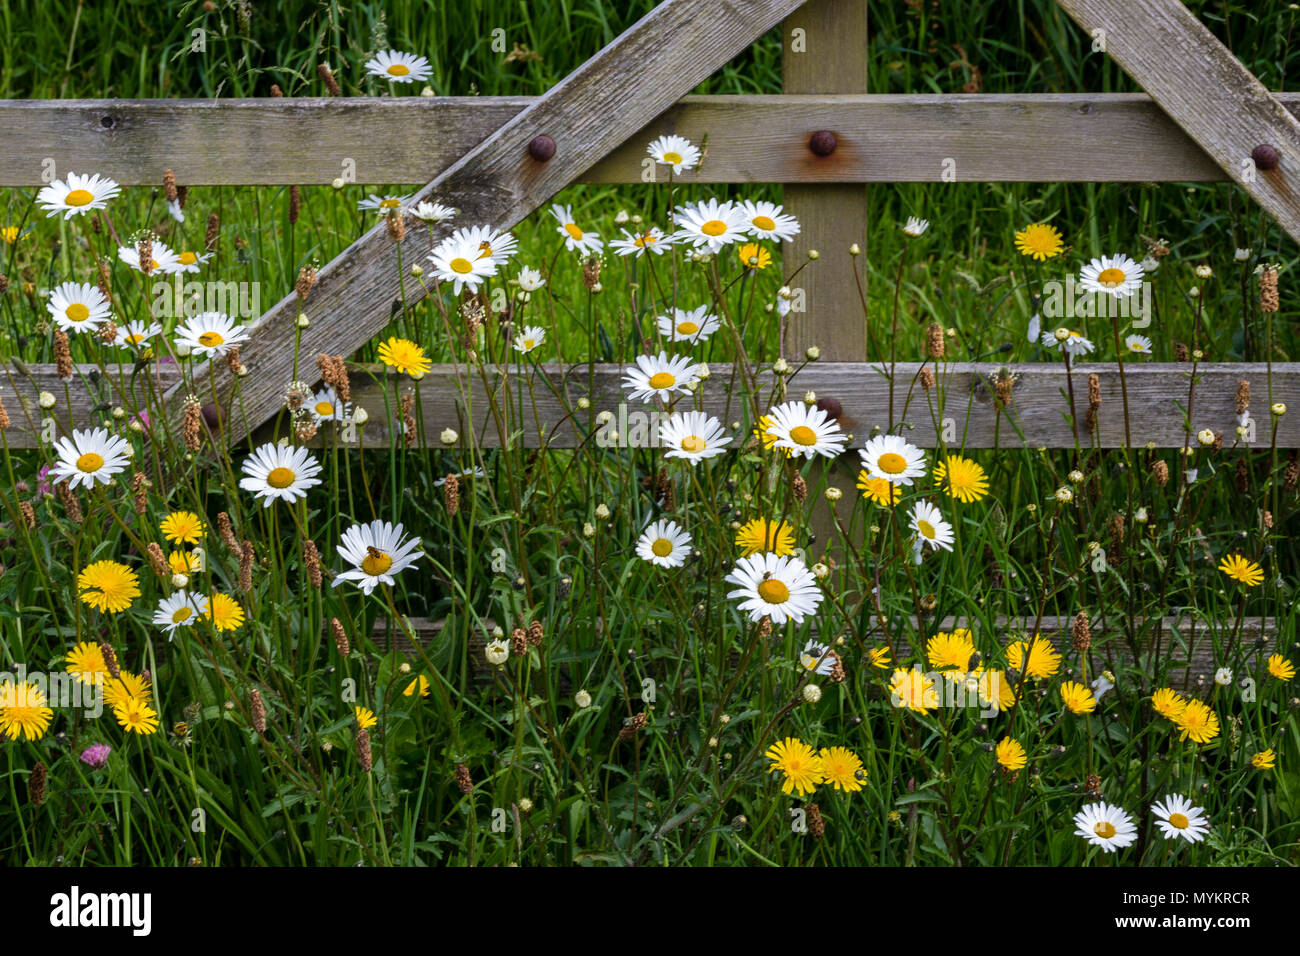 Dandelions and daisies by wooded garden gate Stock Photo